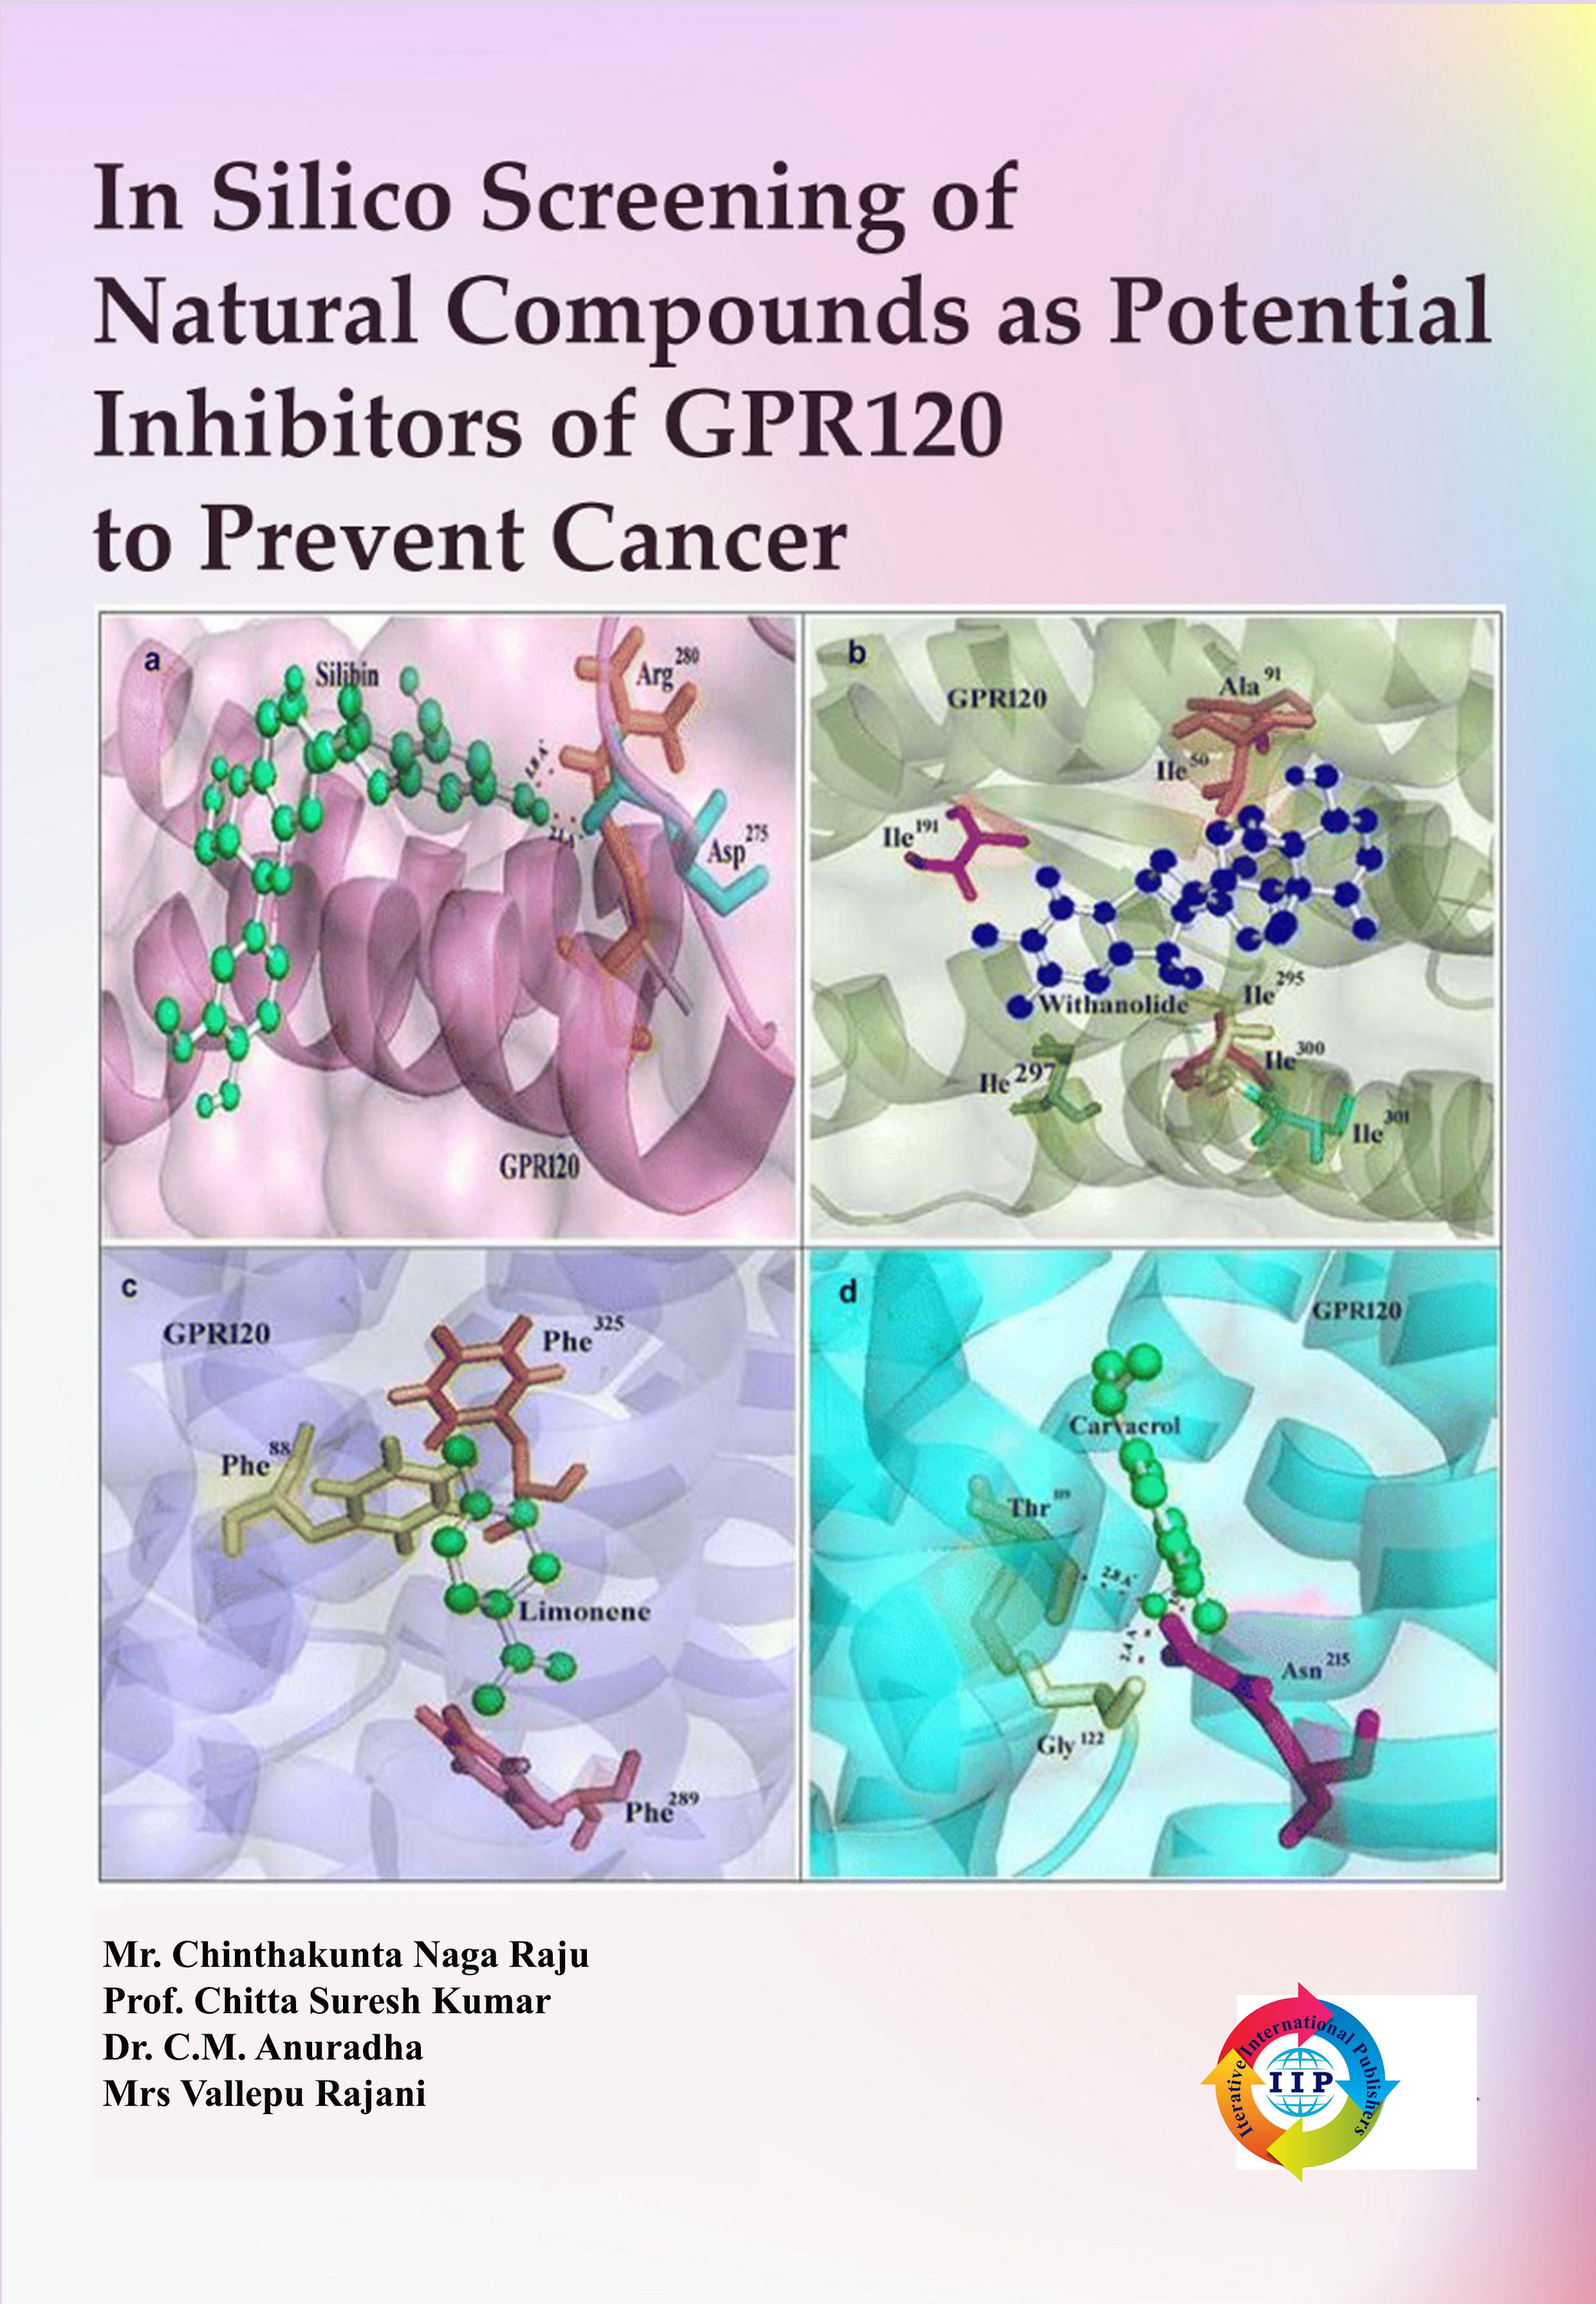 IN SILICO SCREENING OF NATURAL COMPOUNDS AS POTENTIAL INHIBITORS OF GPR120 TO PREVENT CANCER